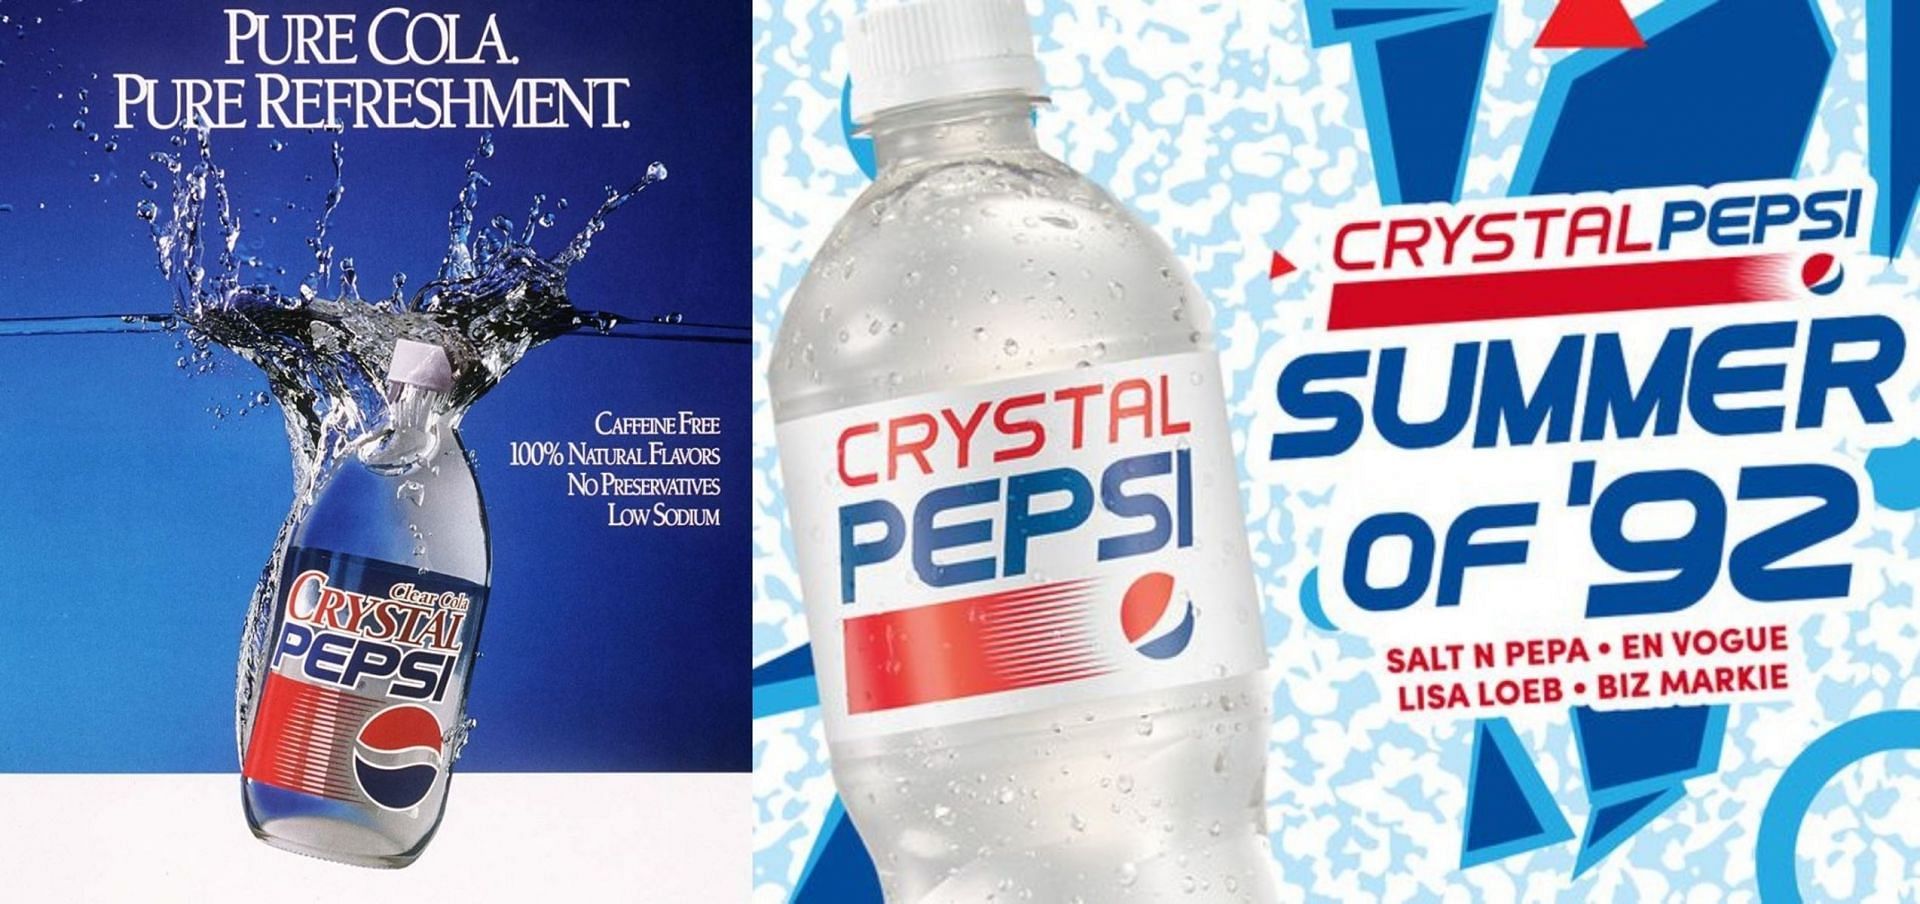 What does Crystal Pepsi taste like? How to participate in Twitter